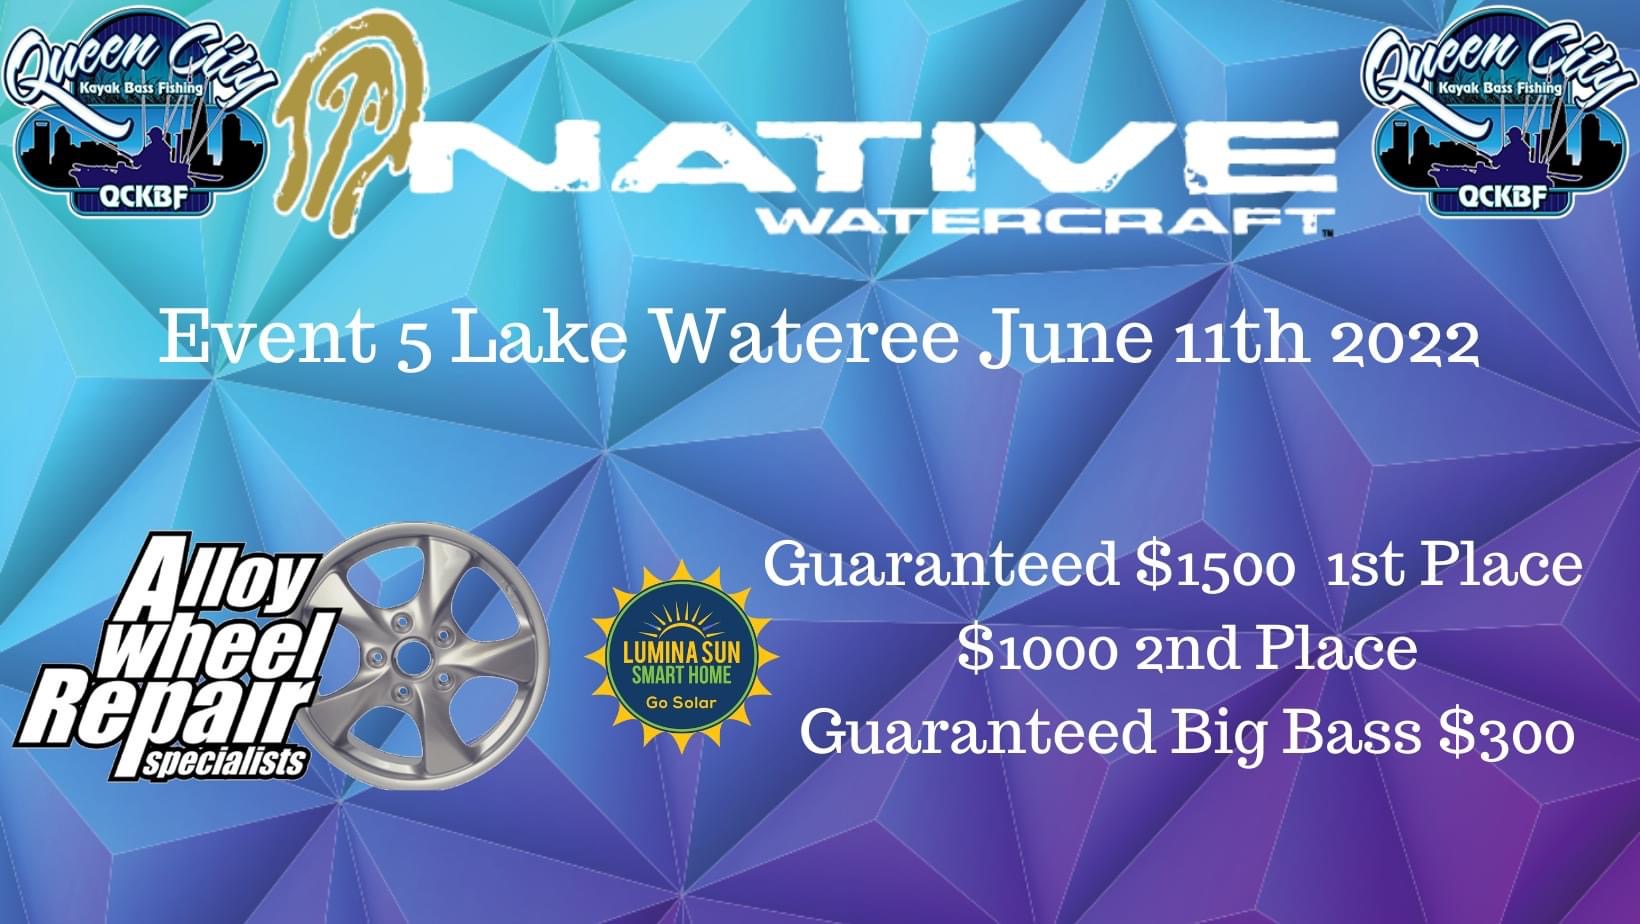 Event 5 Lake Wateree Presented by Alloy Wheel Repair Specialists of Charlotte